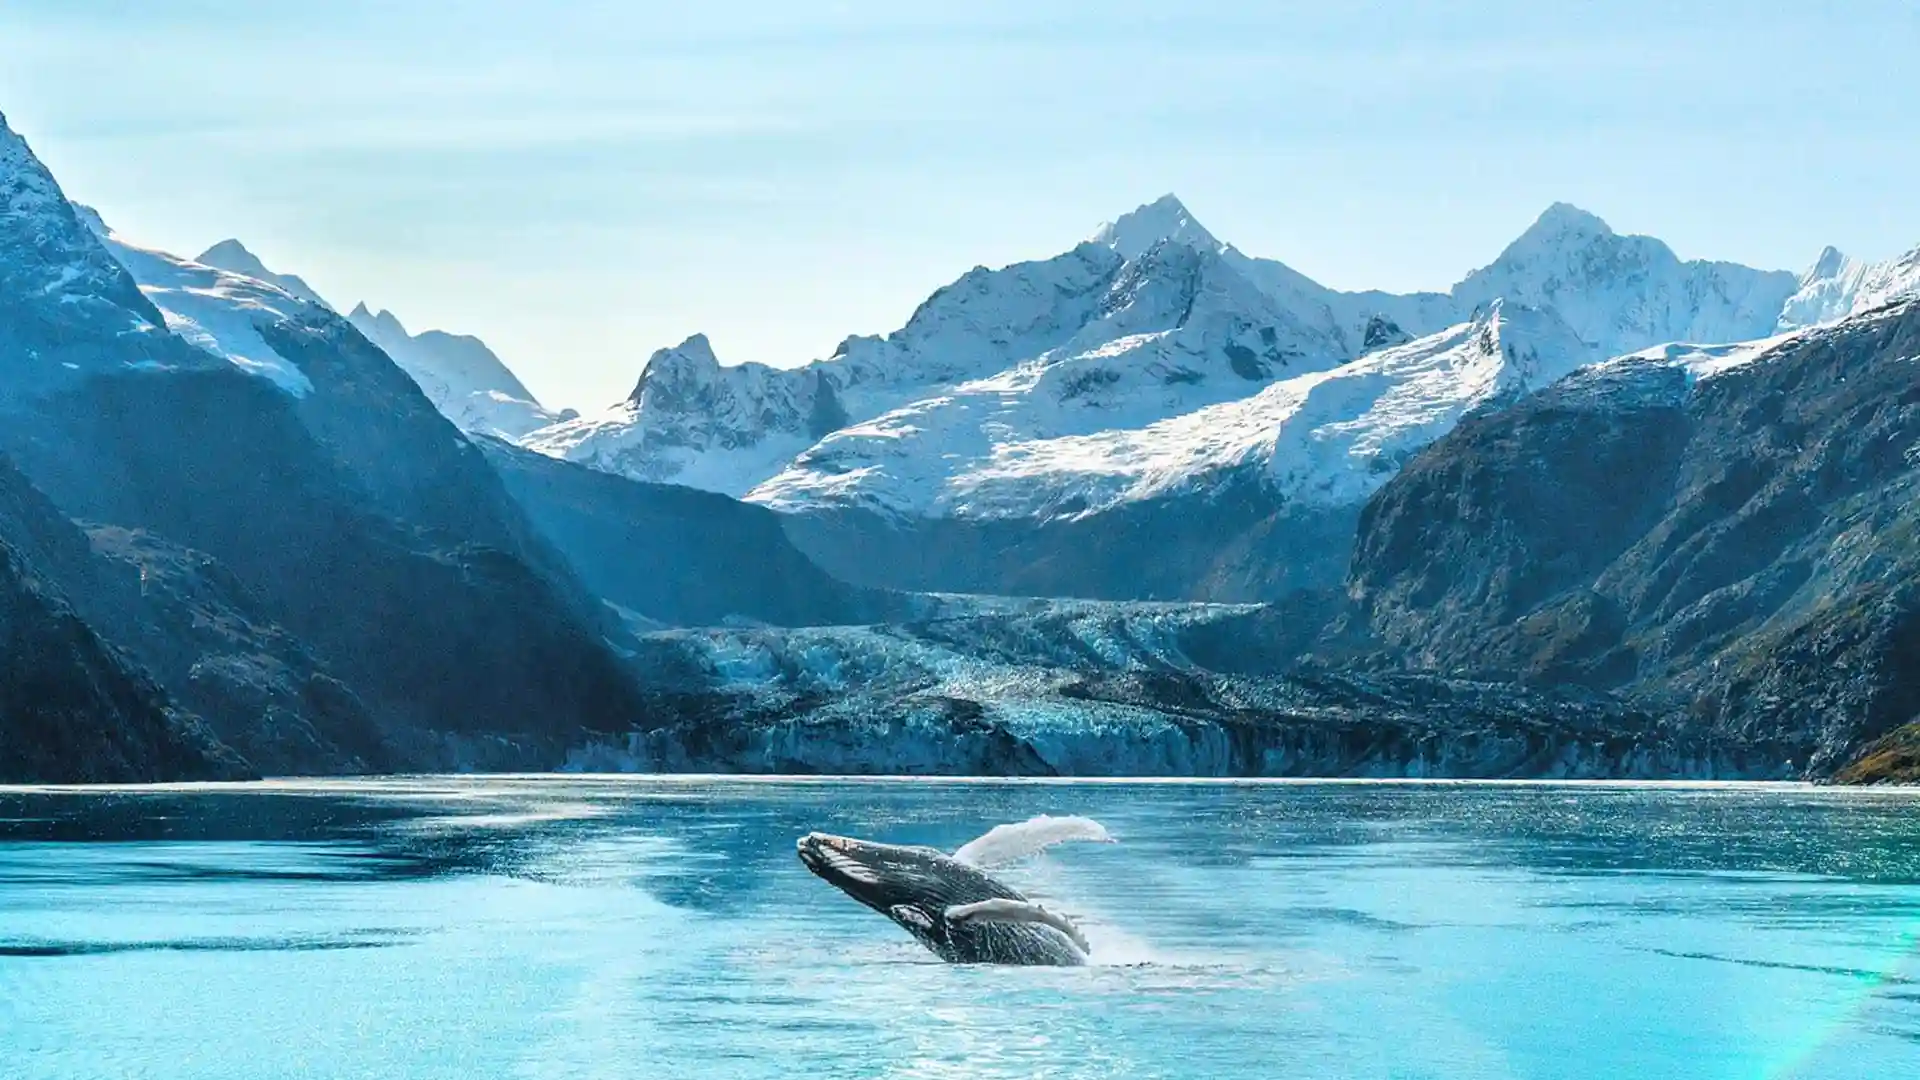 View of whale breaching waters in Glacier Bay, Alaska, with snowcapped mountains in background.